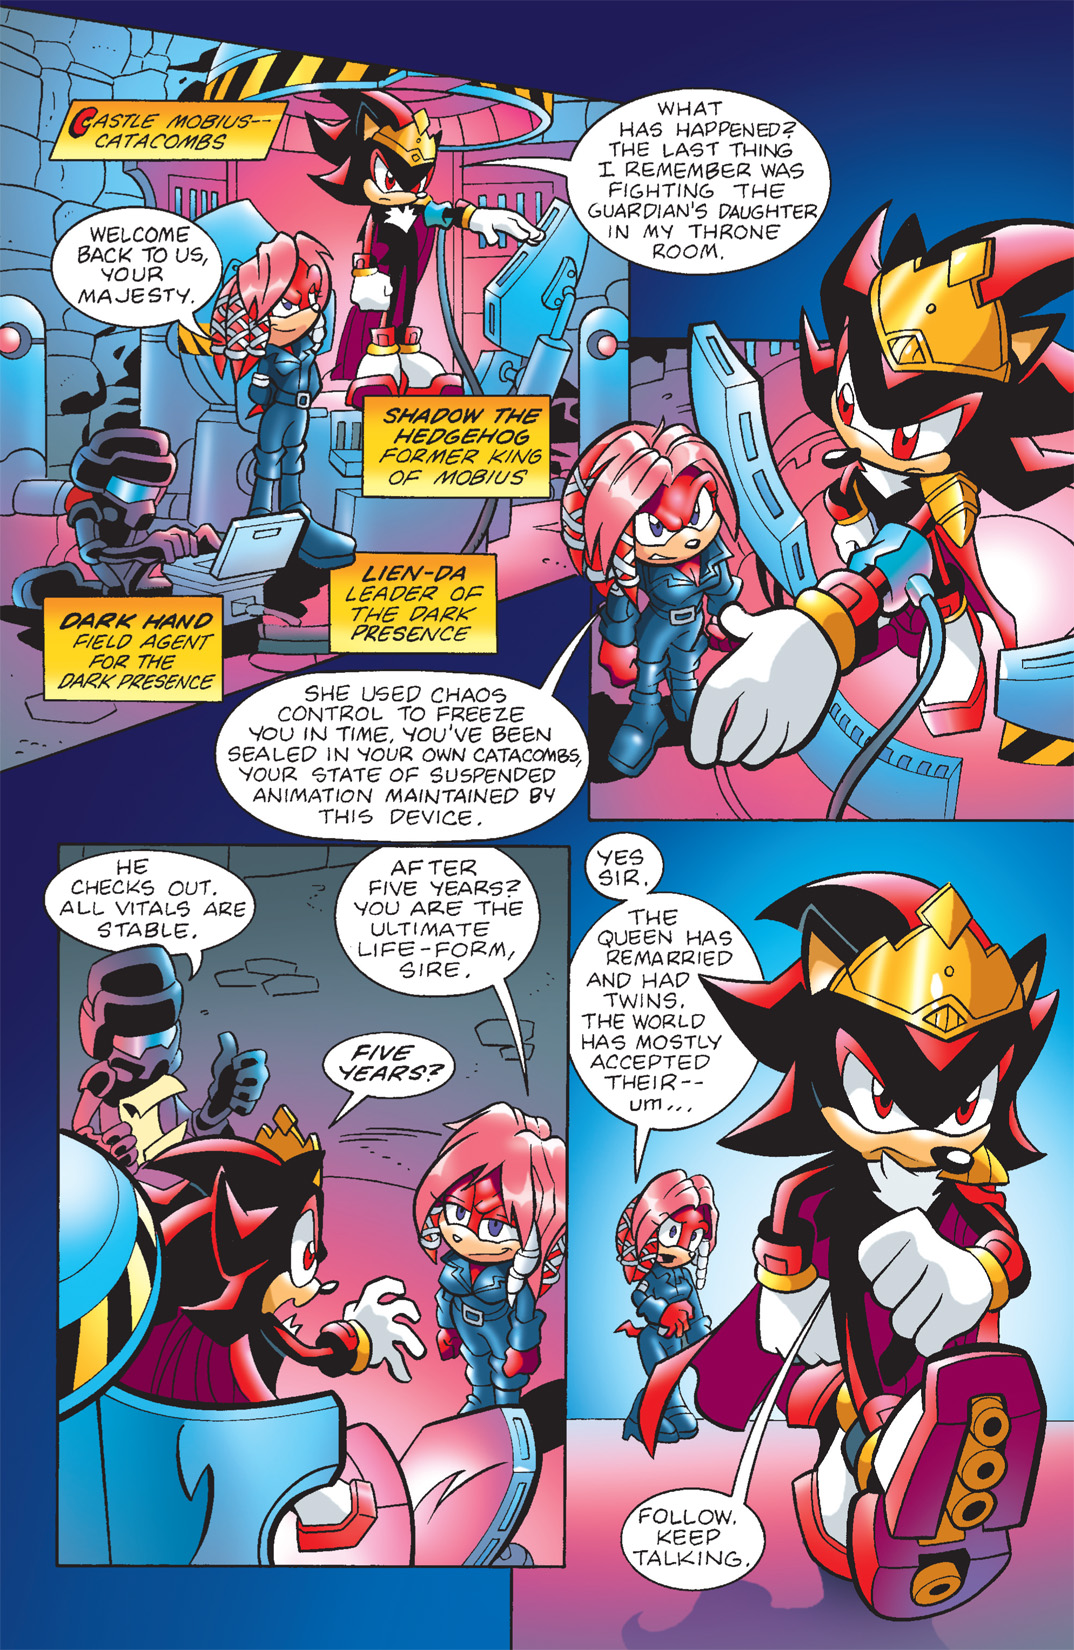 Daily Archie Sonic Echidna Pics On Twitter Sonic Universe Issue 7 Mobius 30 Years Later Part